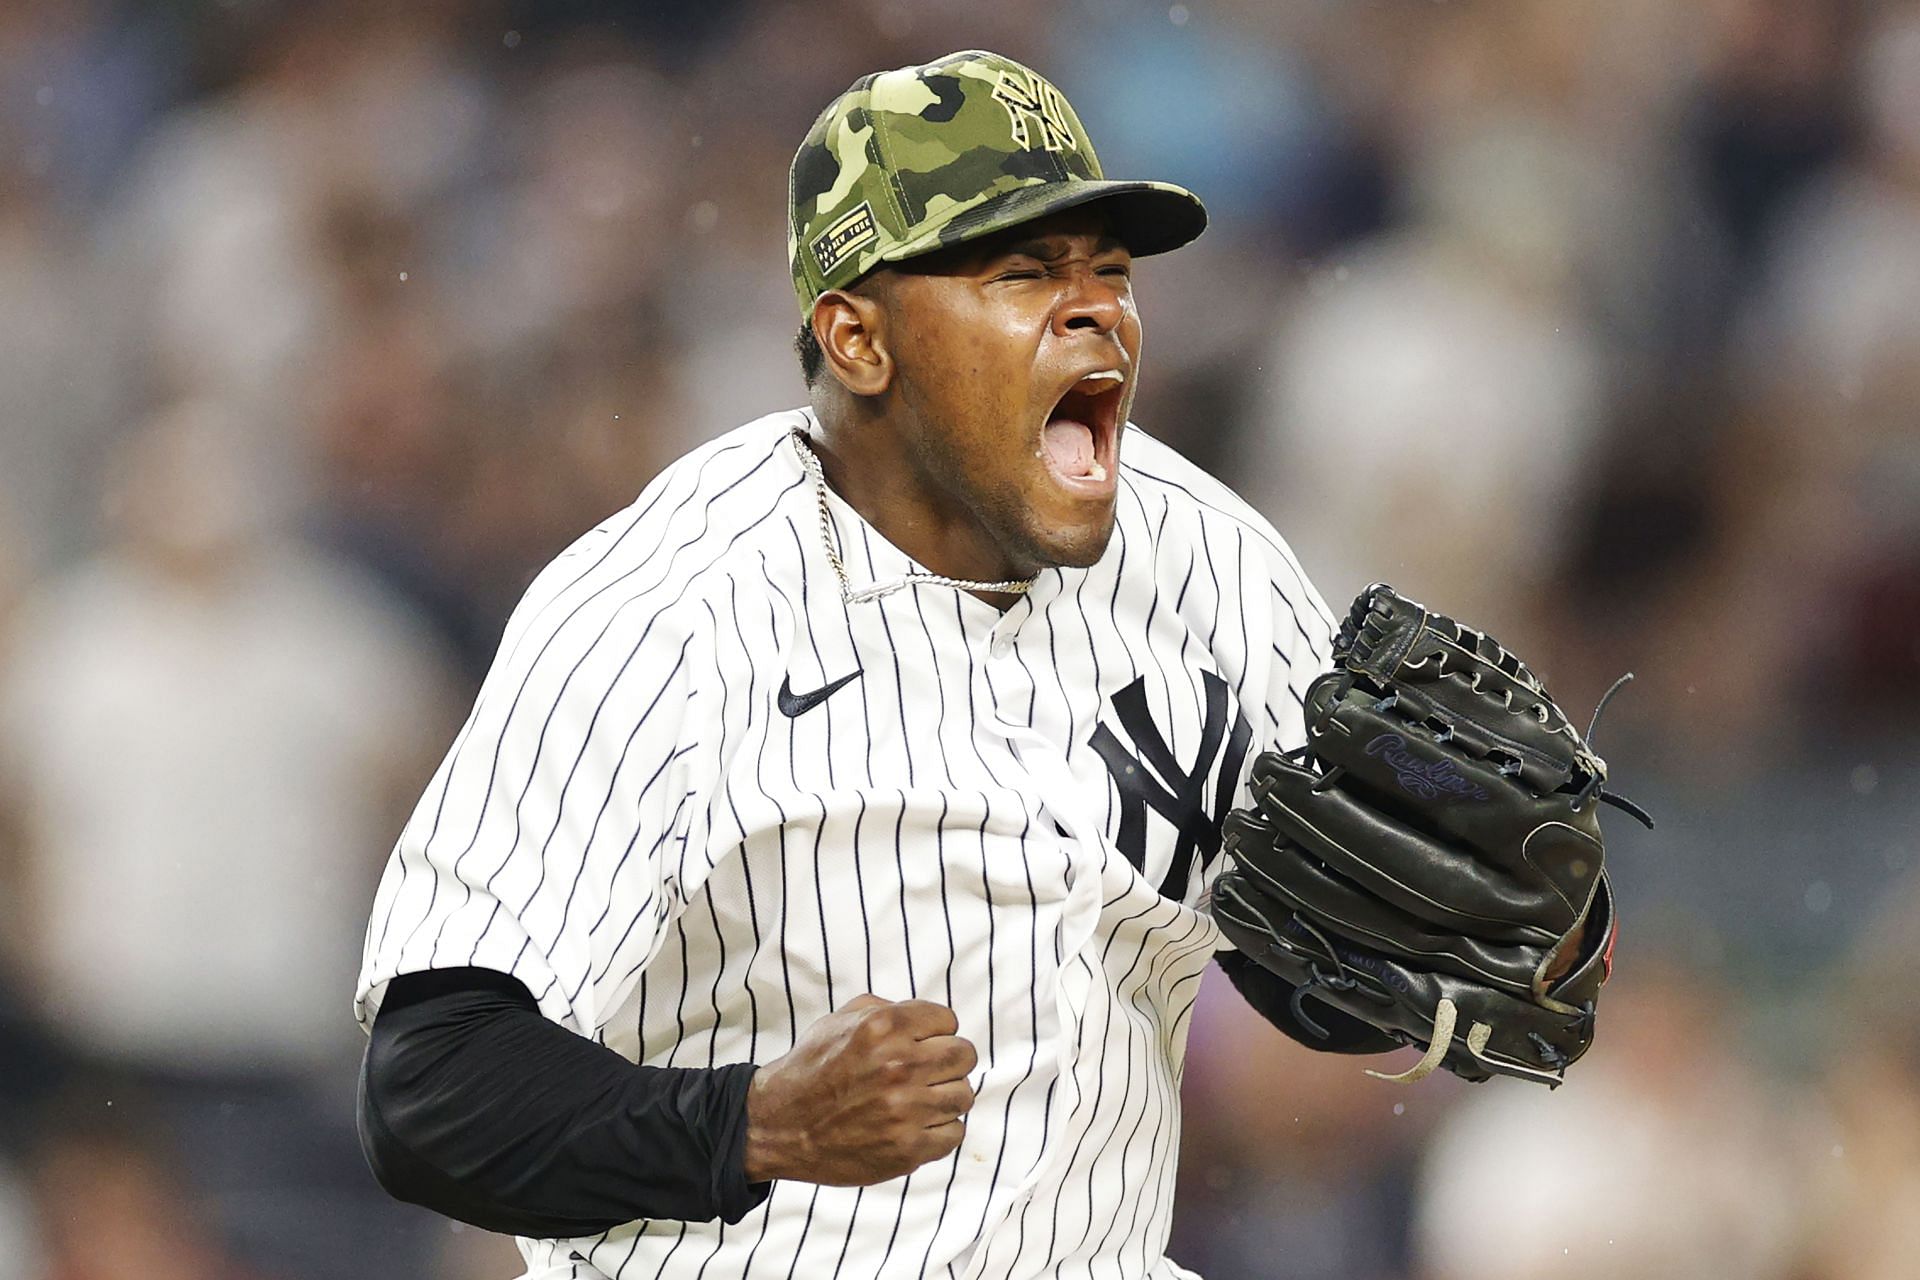 New York Yankees starting pitcher Luis Severino threw seven innings of one-hit ball this afternoon against the Detroit Tigers